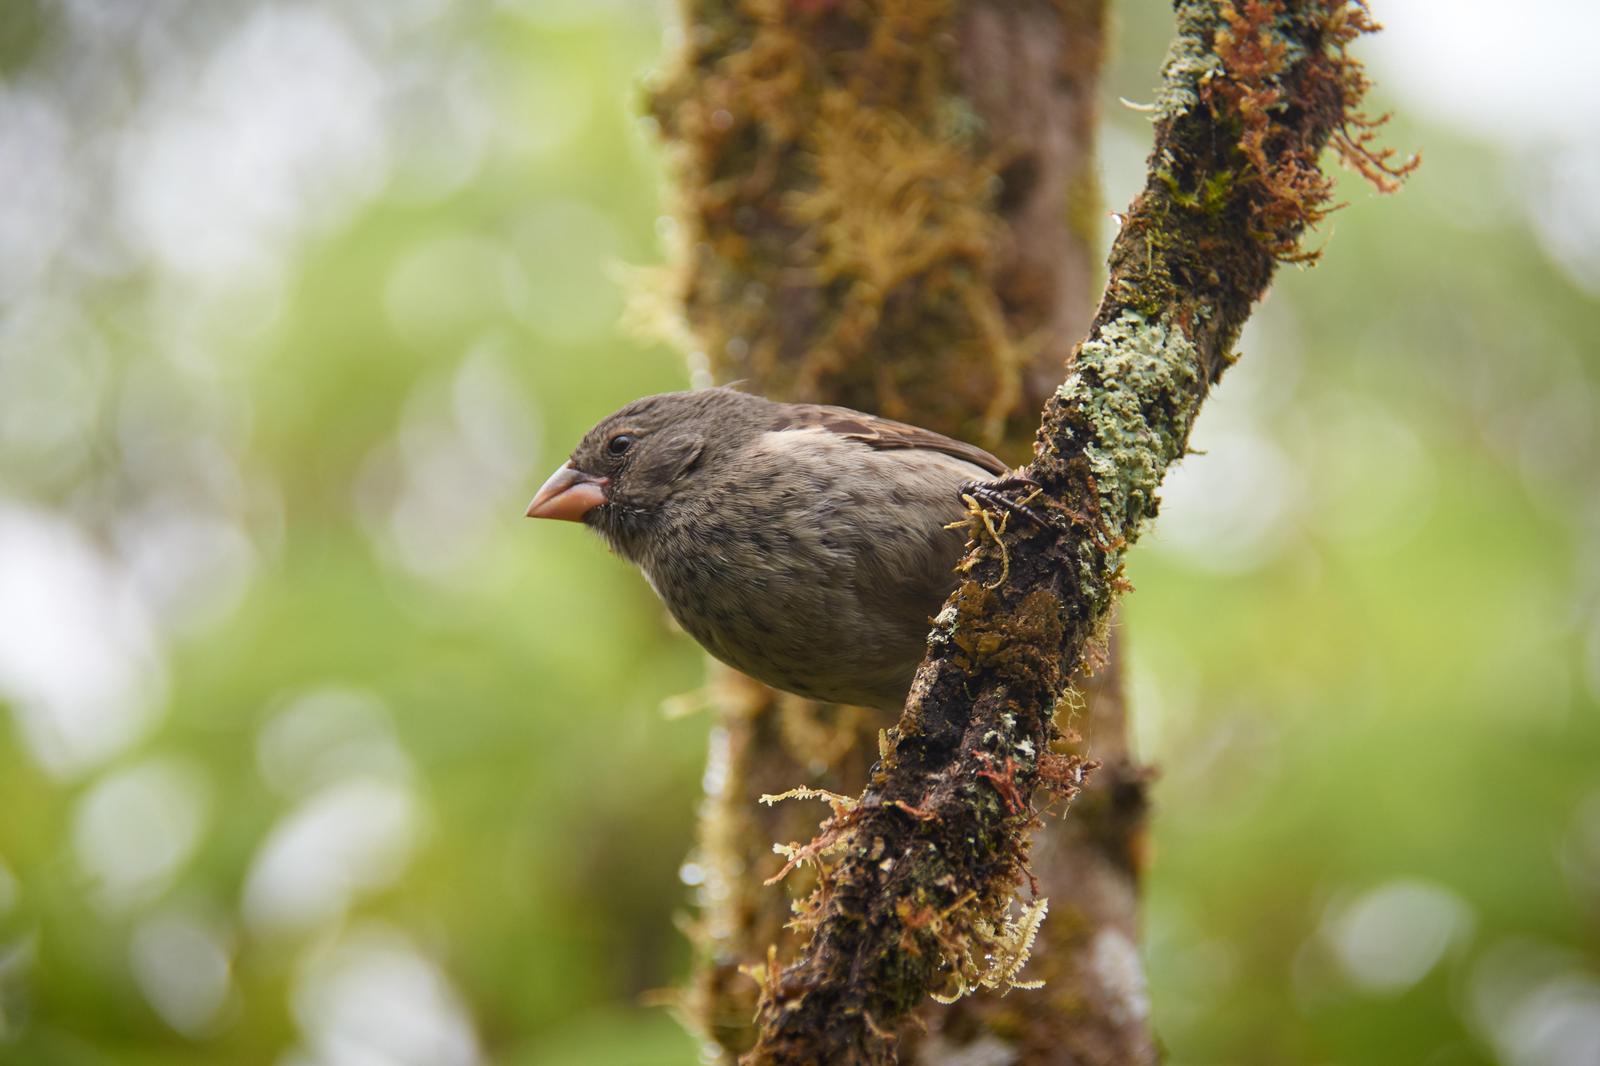 galapagos finch sp. Photo by Emilie Haynes